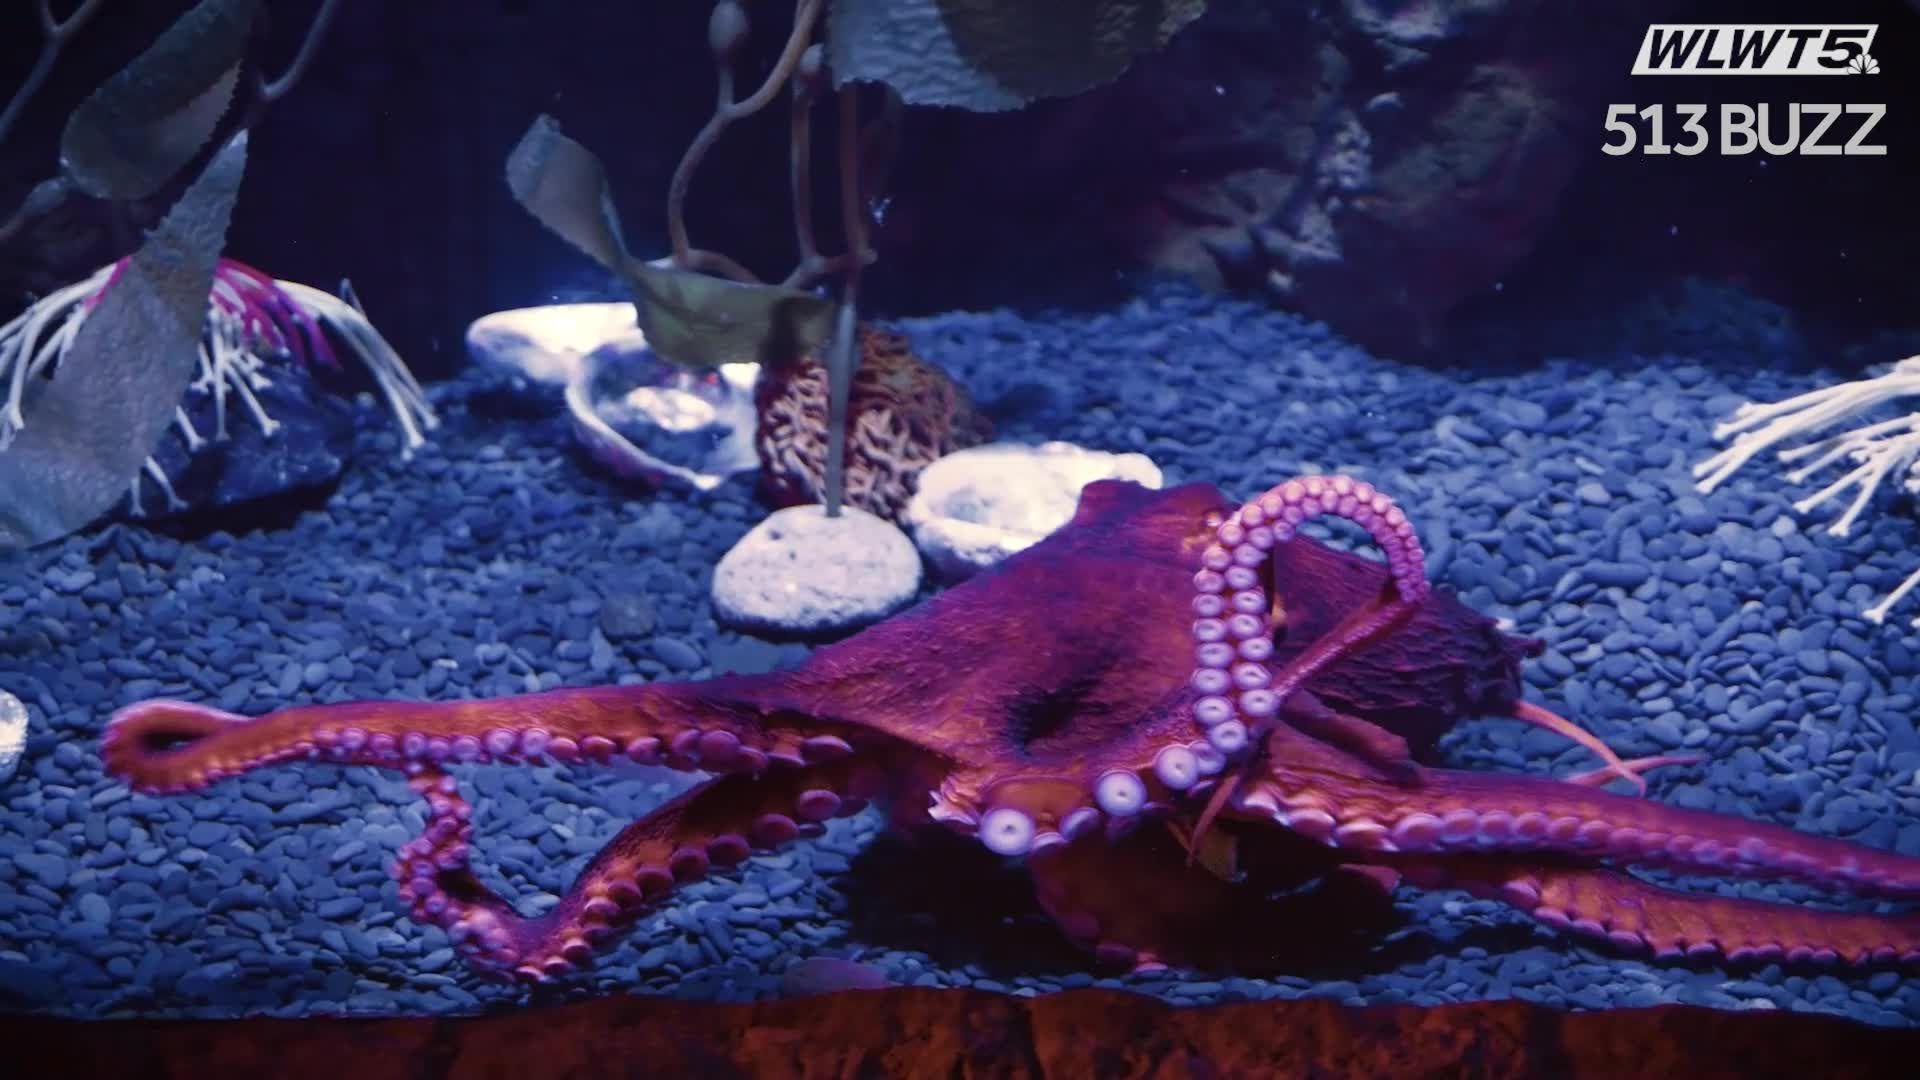 Ring of Fire octopus exhibit to open at Newport Aquarium this weekend